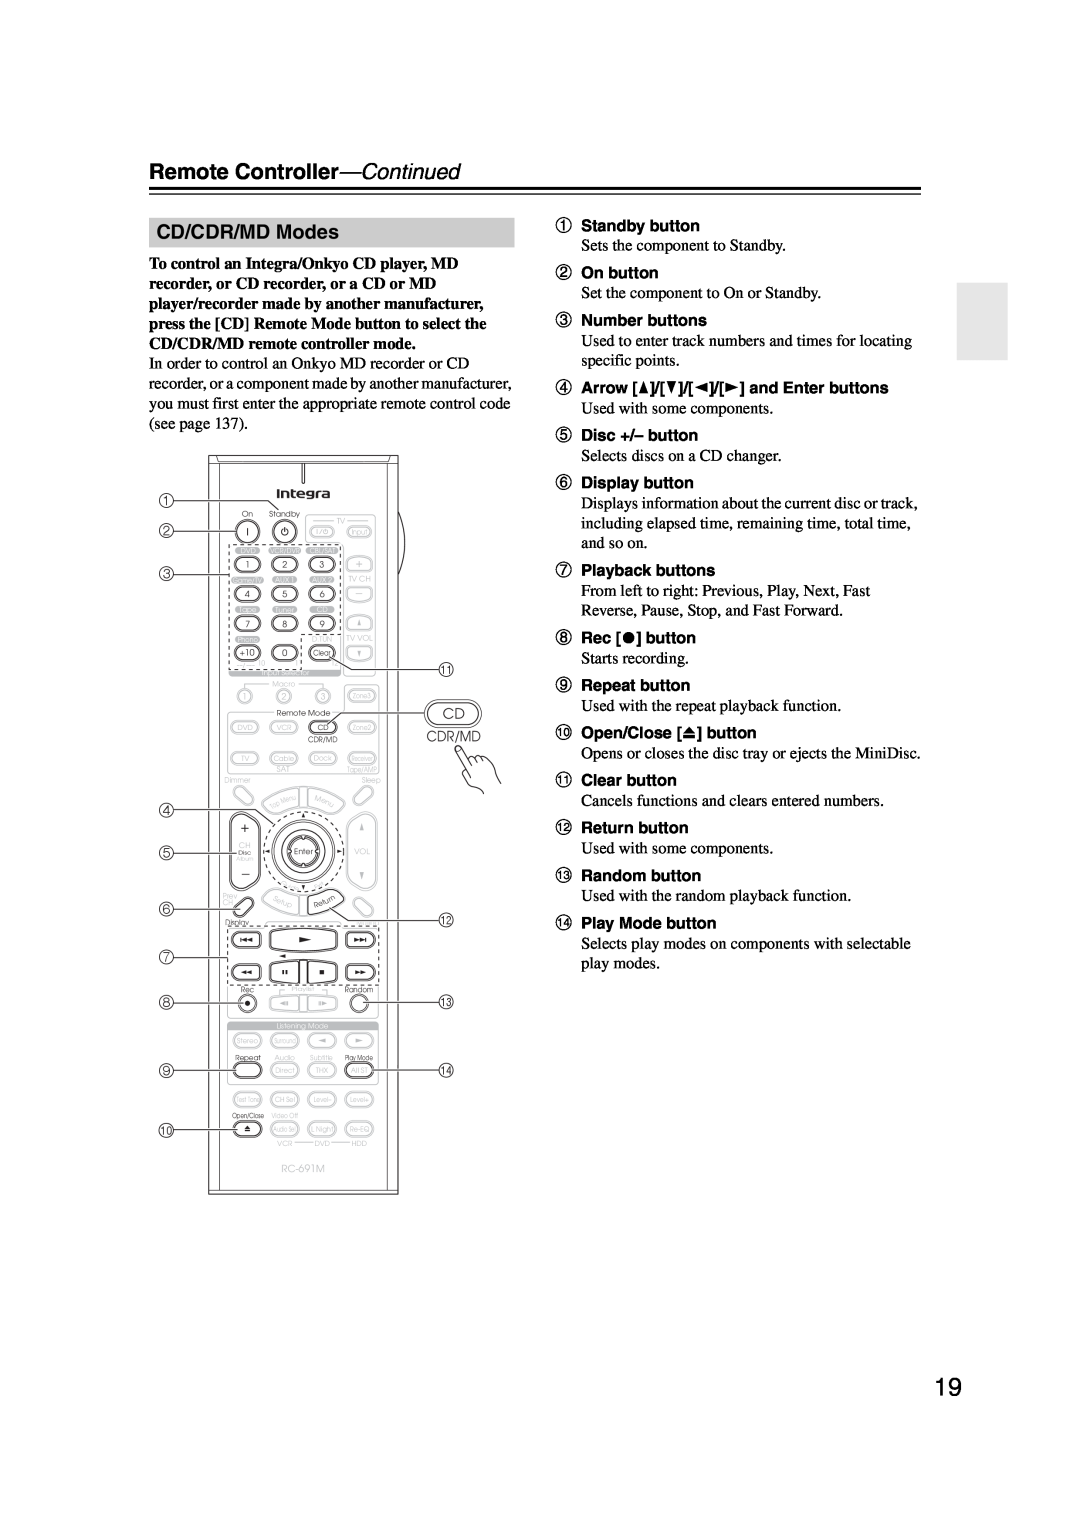 Integra DHC-9.9 instruction manual CD/CDR/MD Modes, Remote Controller—Continued 